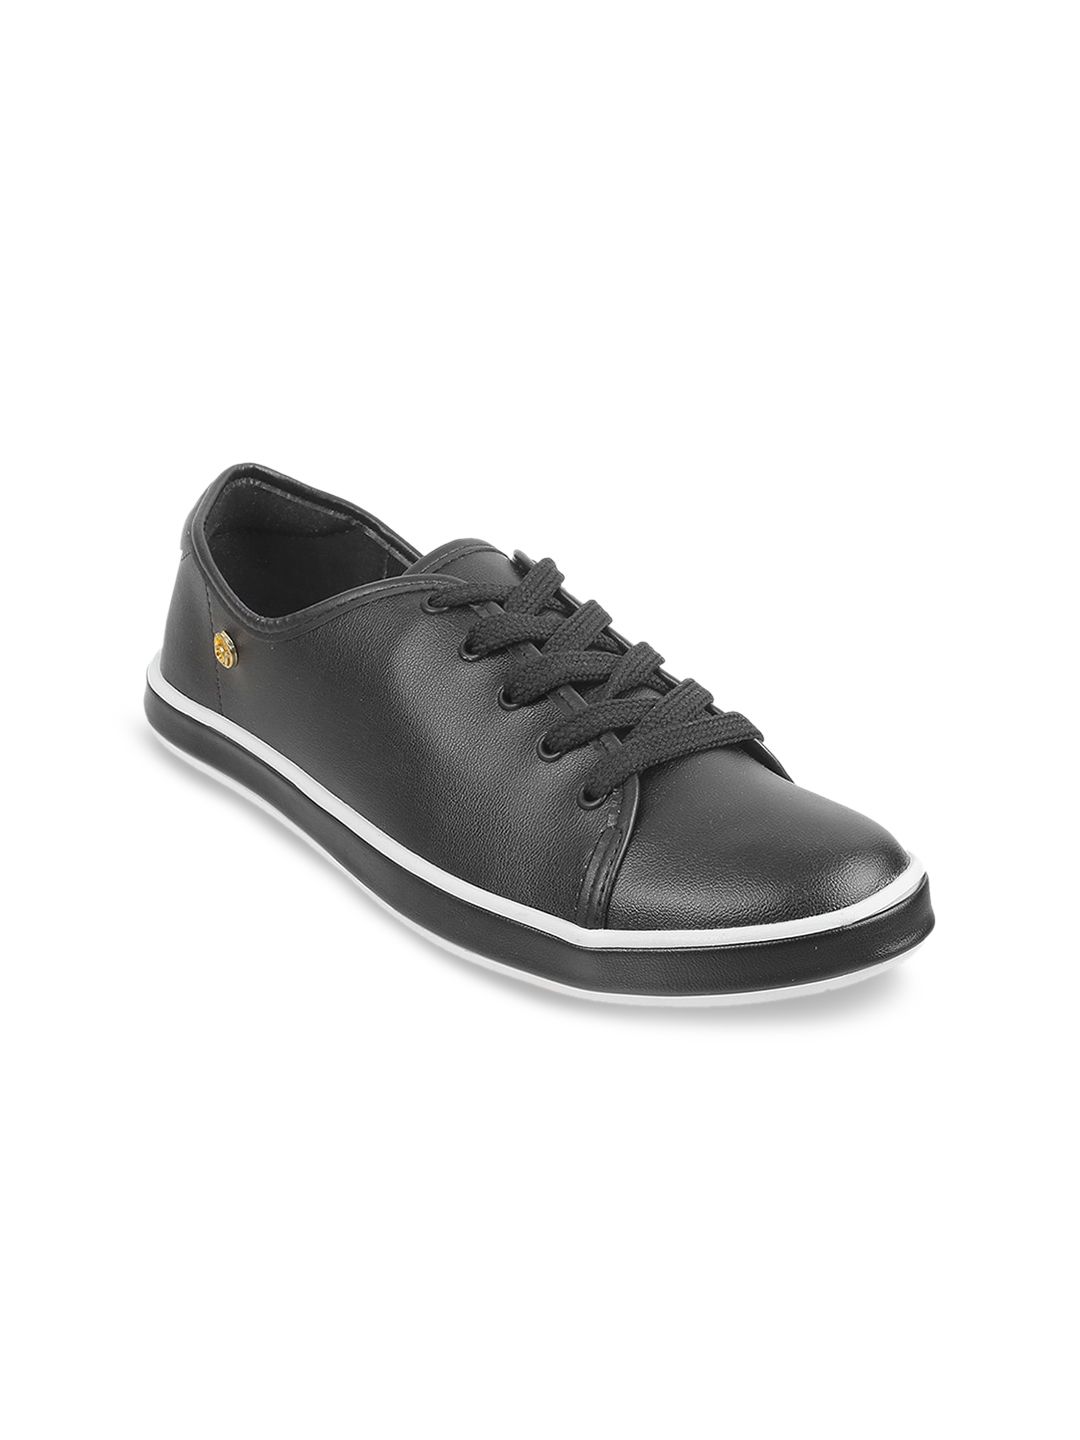 Metro Women Lace-Up Sneakers Price in India